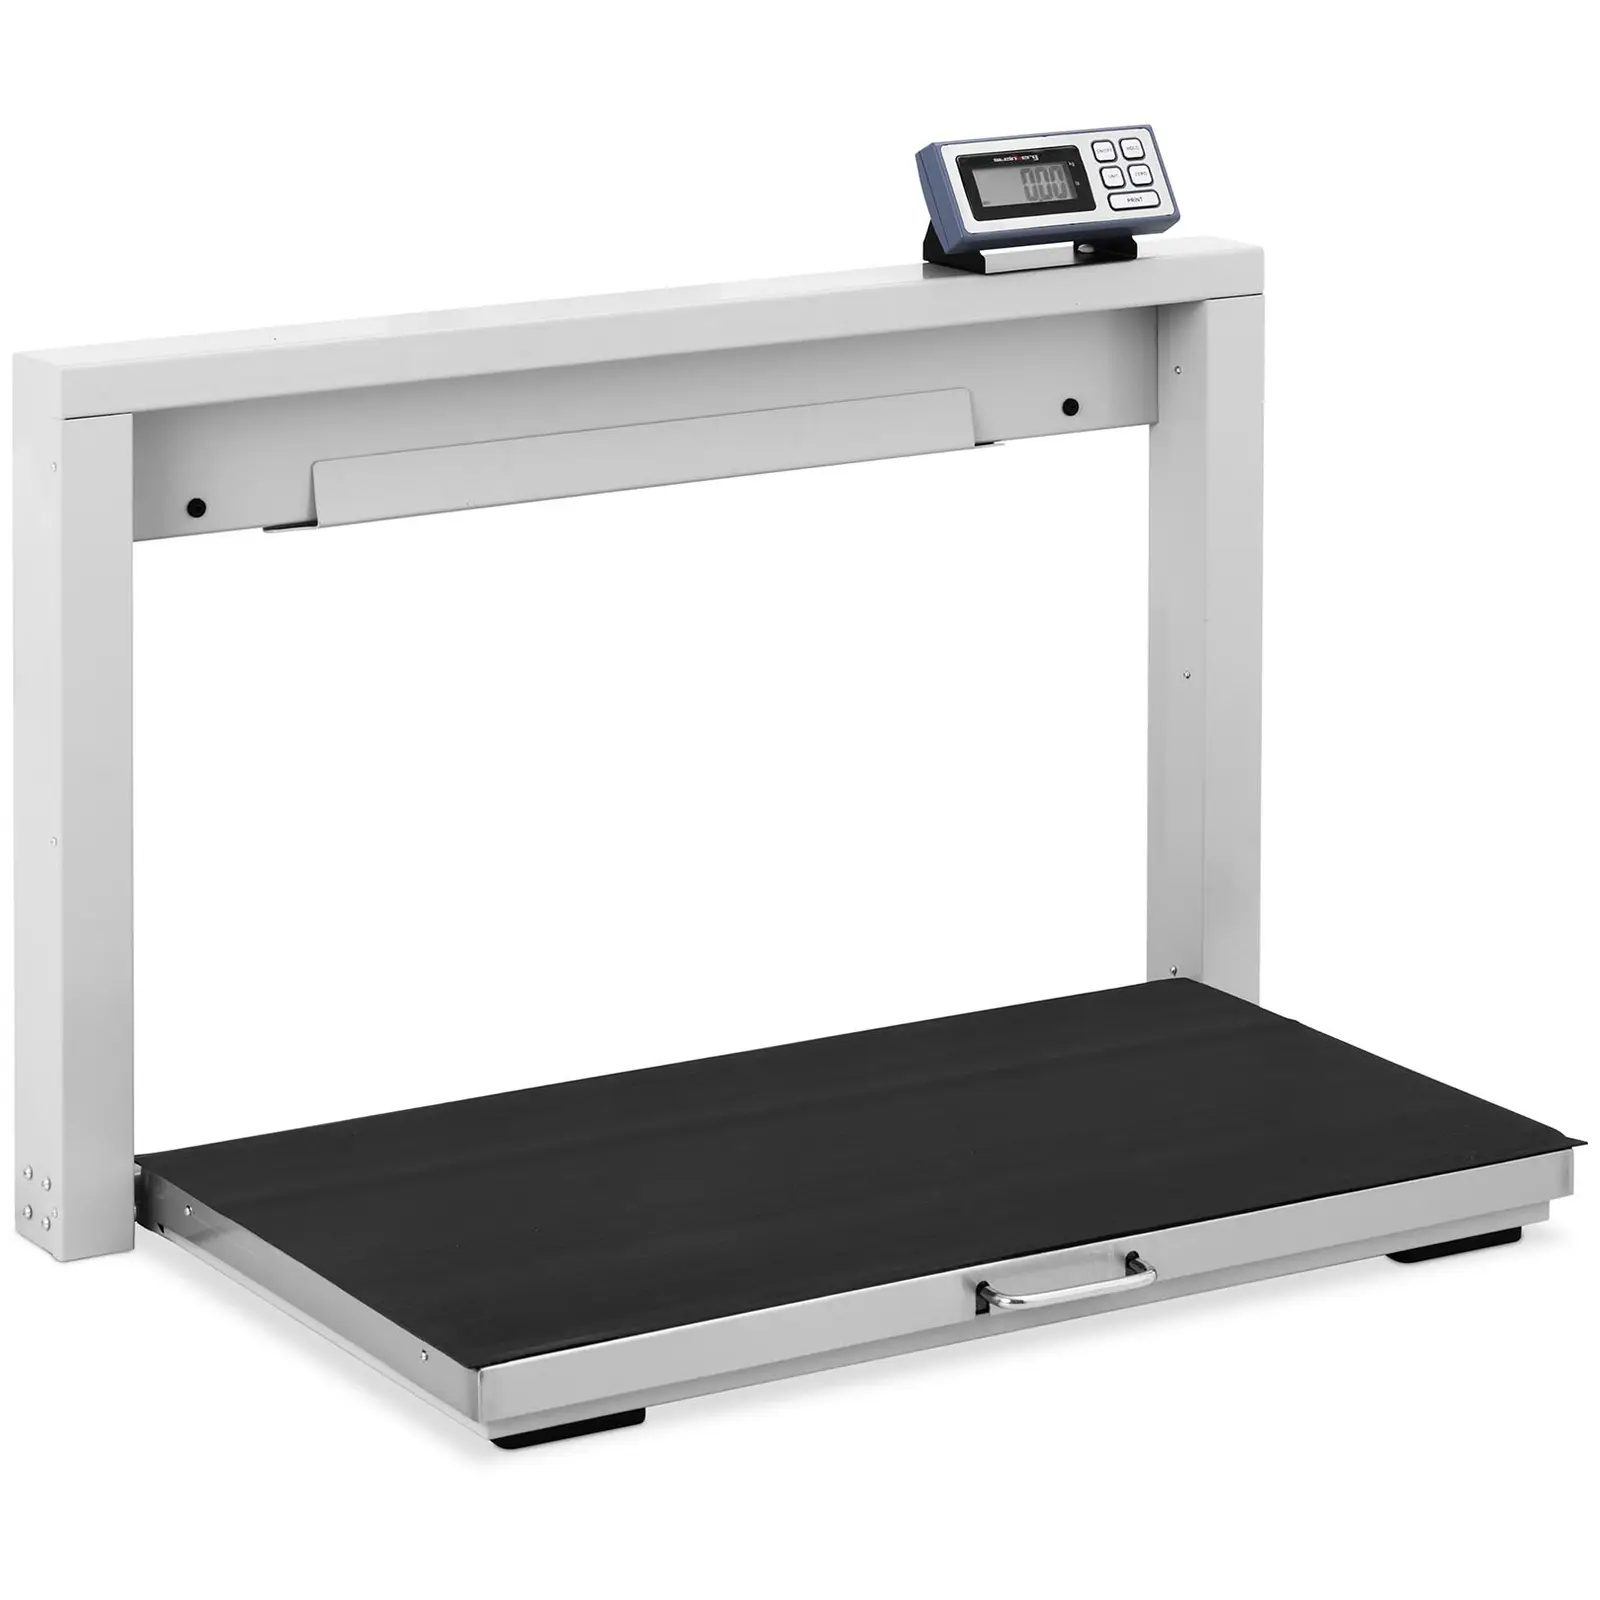 Industrial Scale - 150 kg / 50 g - anti-slip mat - foldable - LCD